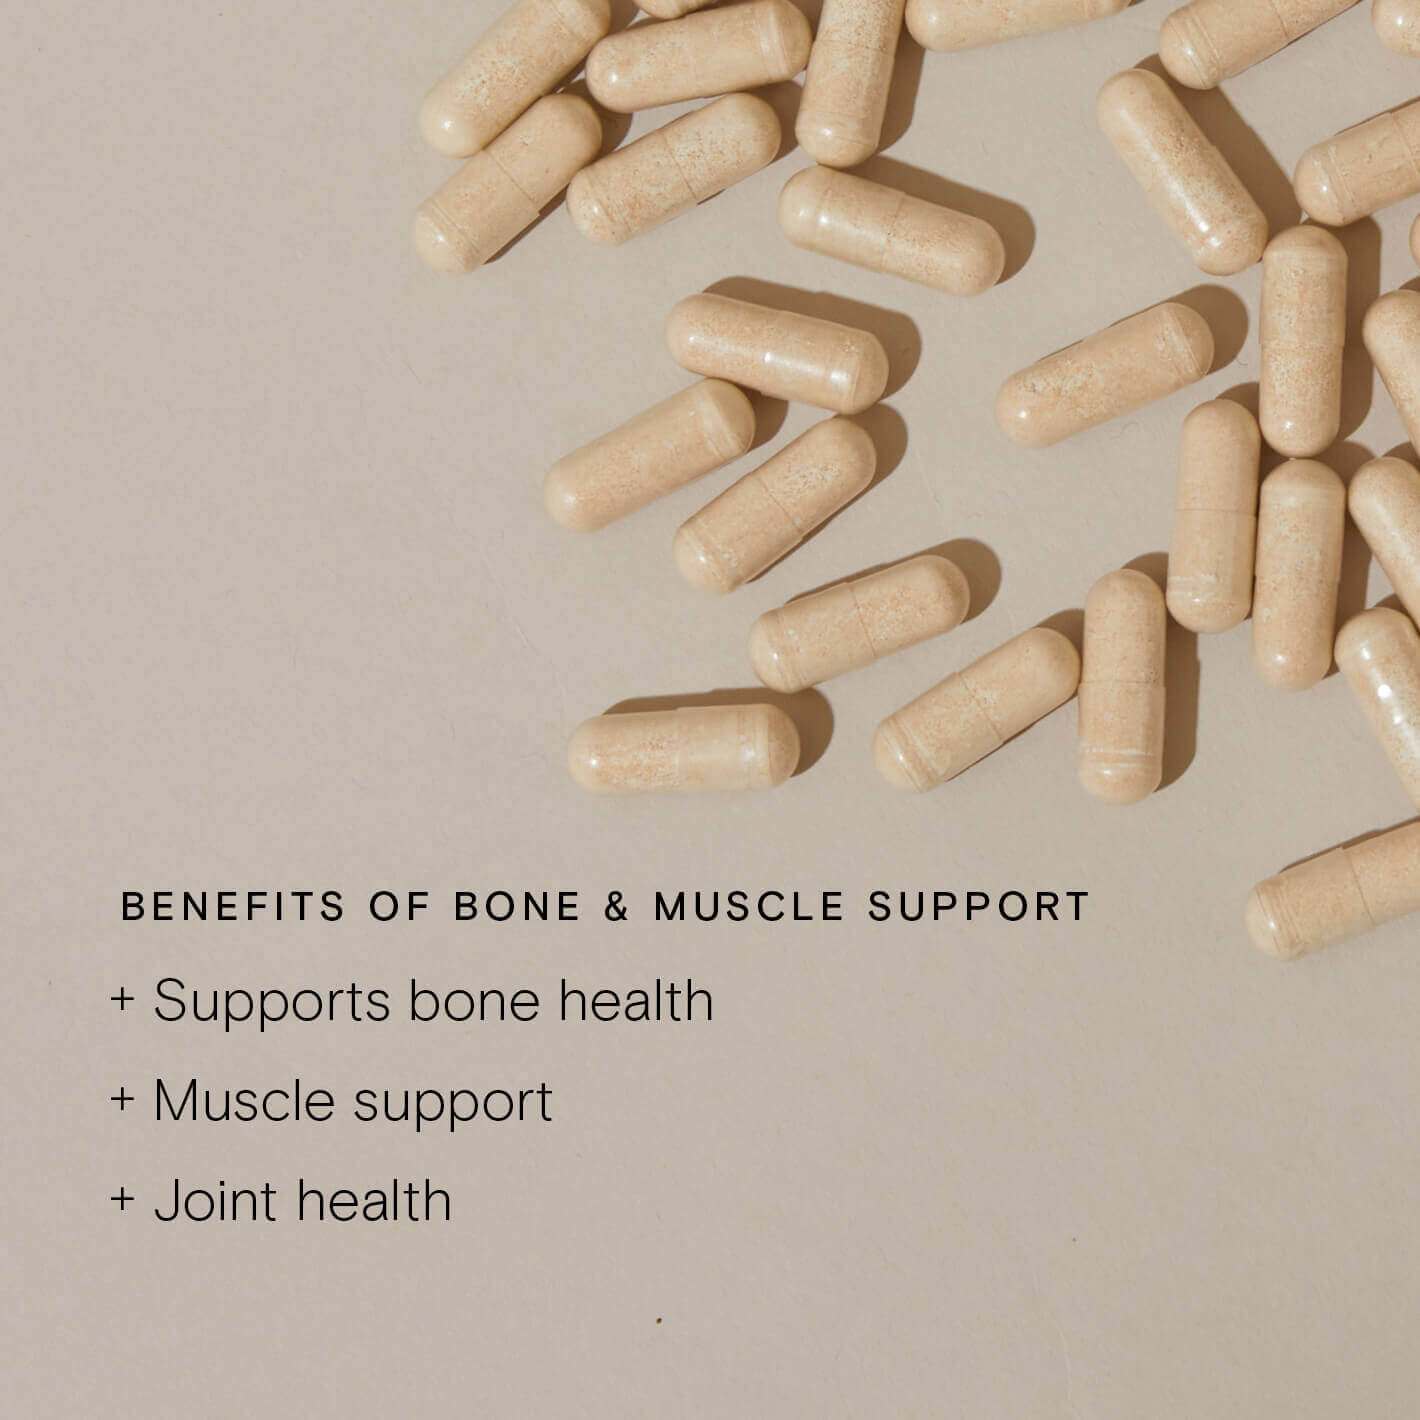 Food-Grown® Bone + Muscle Support